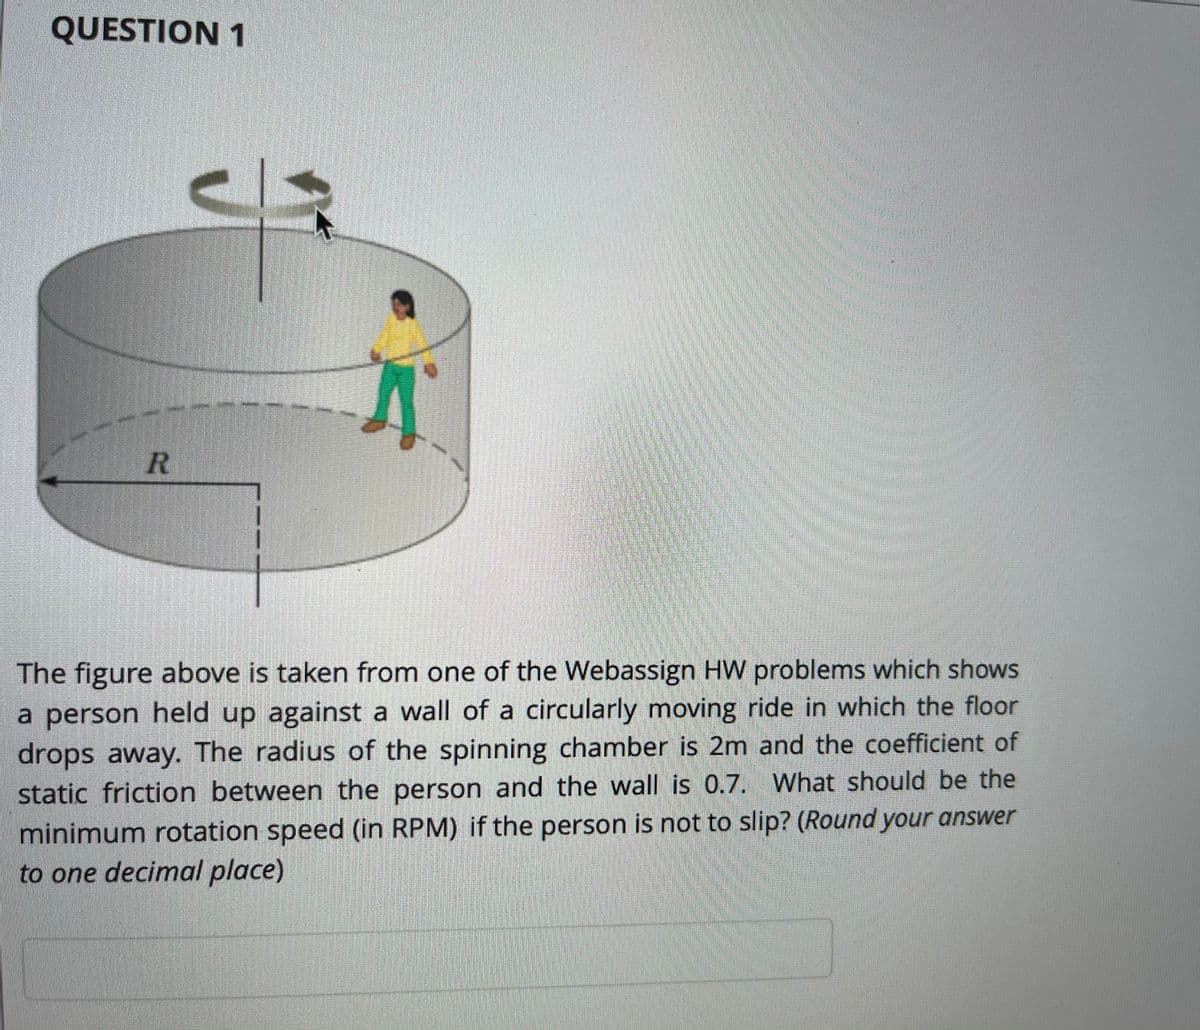 QUESTION 1
The figure above is taken from one of the Webassign HW problems which shows
a person held up against a wall of a circularly moving ride in which the floor
drops away. The radius of the spinning chamber is 2m and the coefficient of
static friction between the person and the wall is 0.7. What should be the
minimum rotation speed (in RPM) if the person is not to slip? (Round your answer
to one decimal place)
